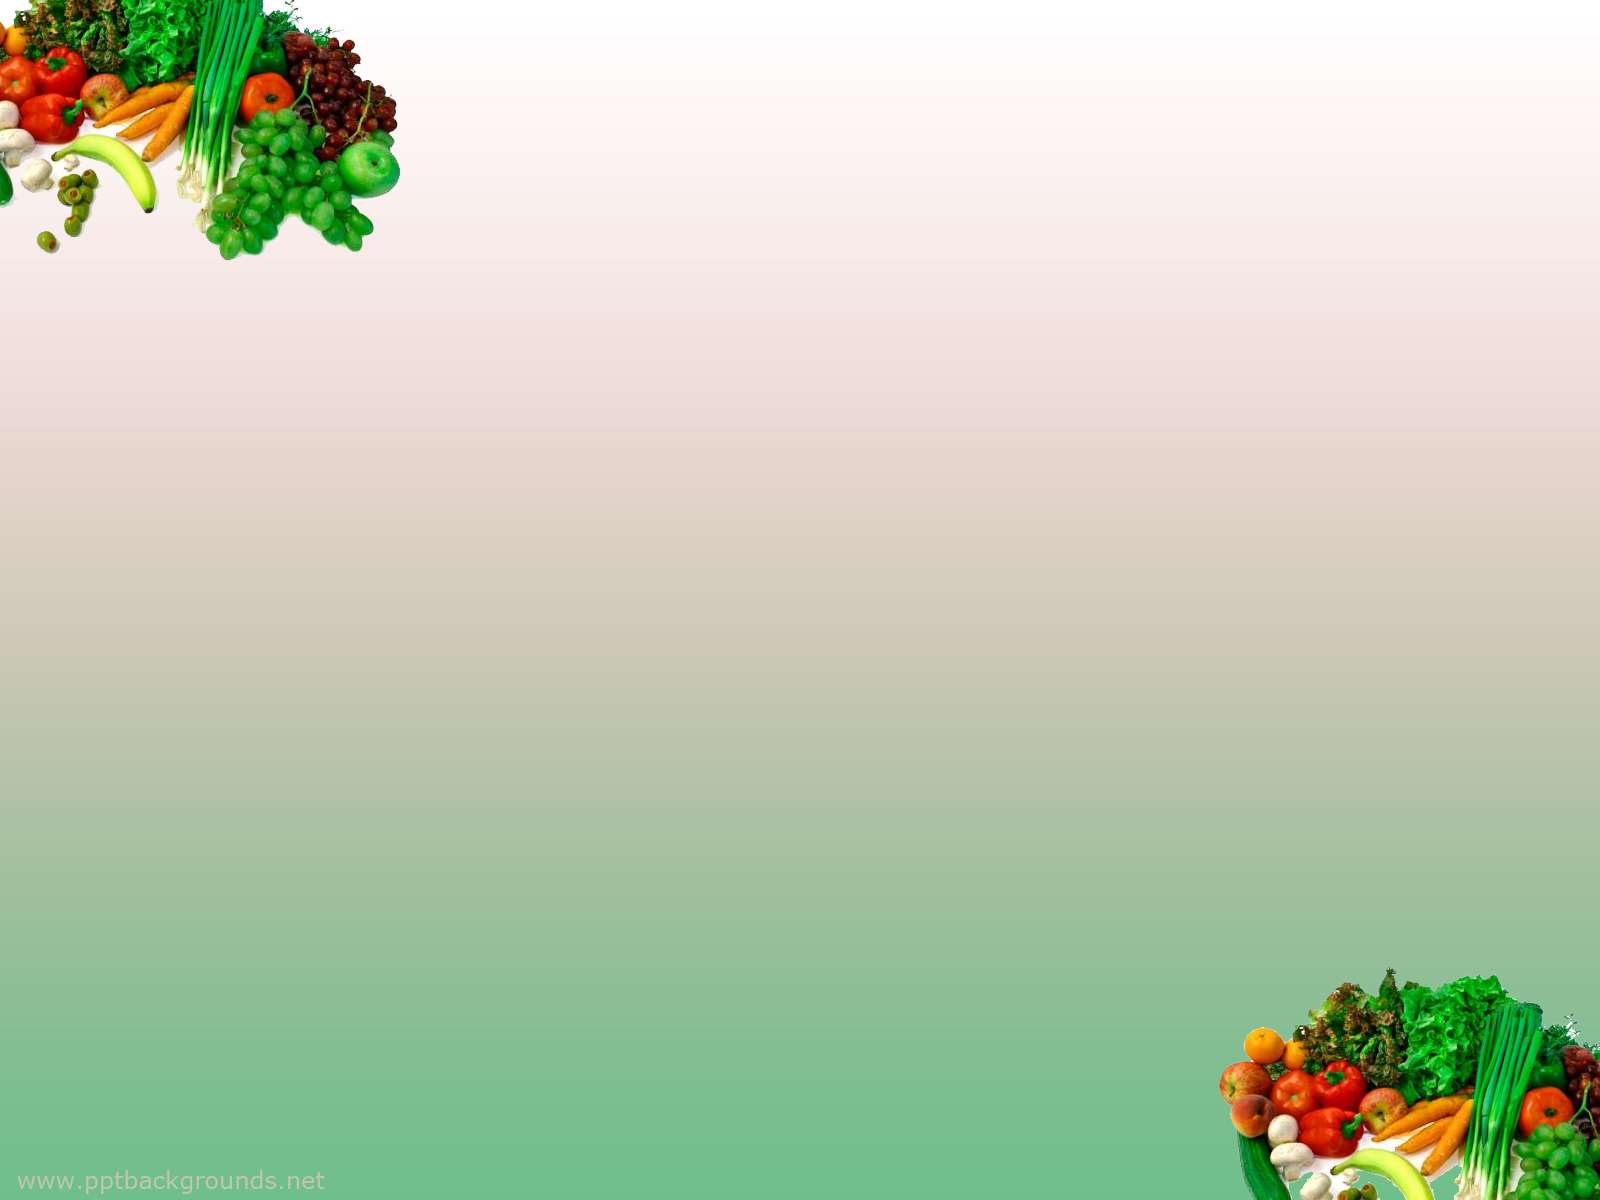 Fruits and Vegetables powerpoint background